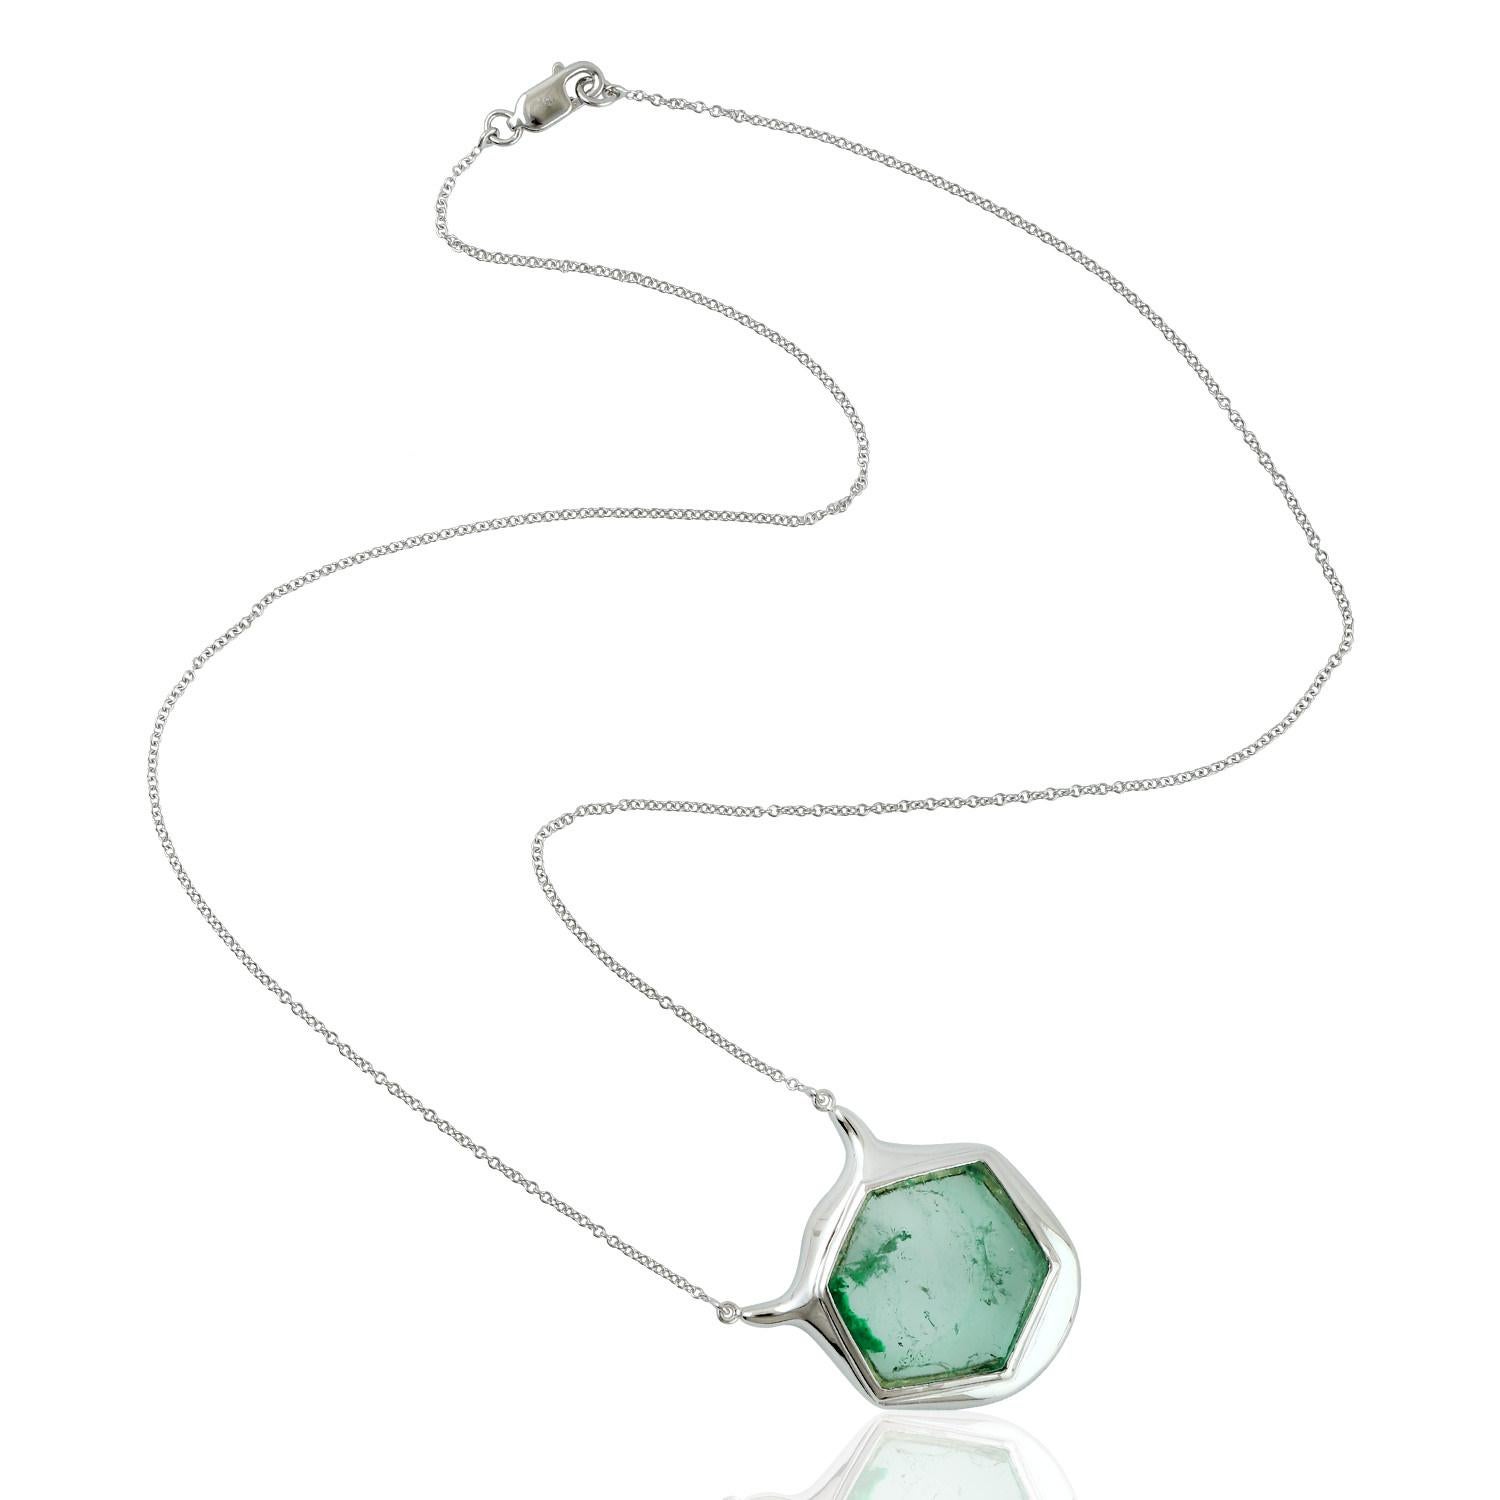 Octagon shape Muzo Emerald Necklace set in White 18K Gold is sweet and perfect to stack.

18KT Gold: 11.060gms
EMERALD: 18.50cts
